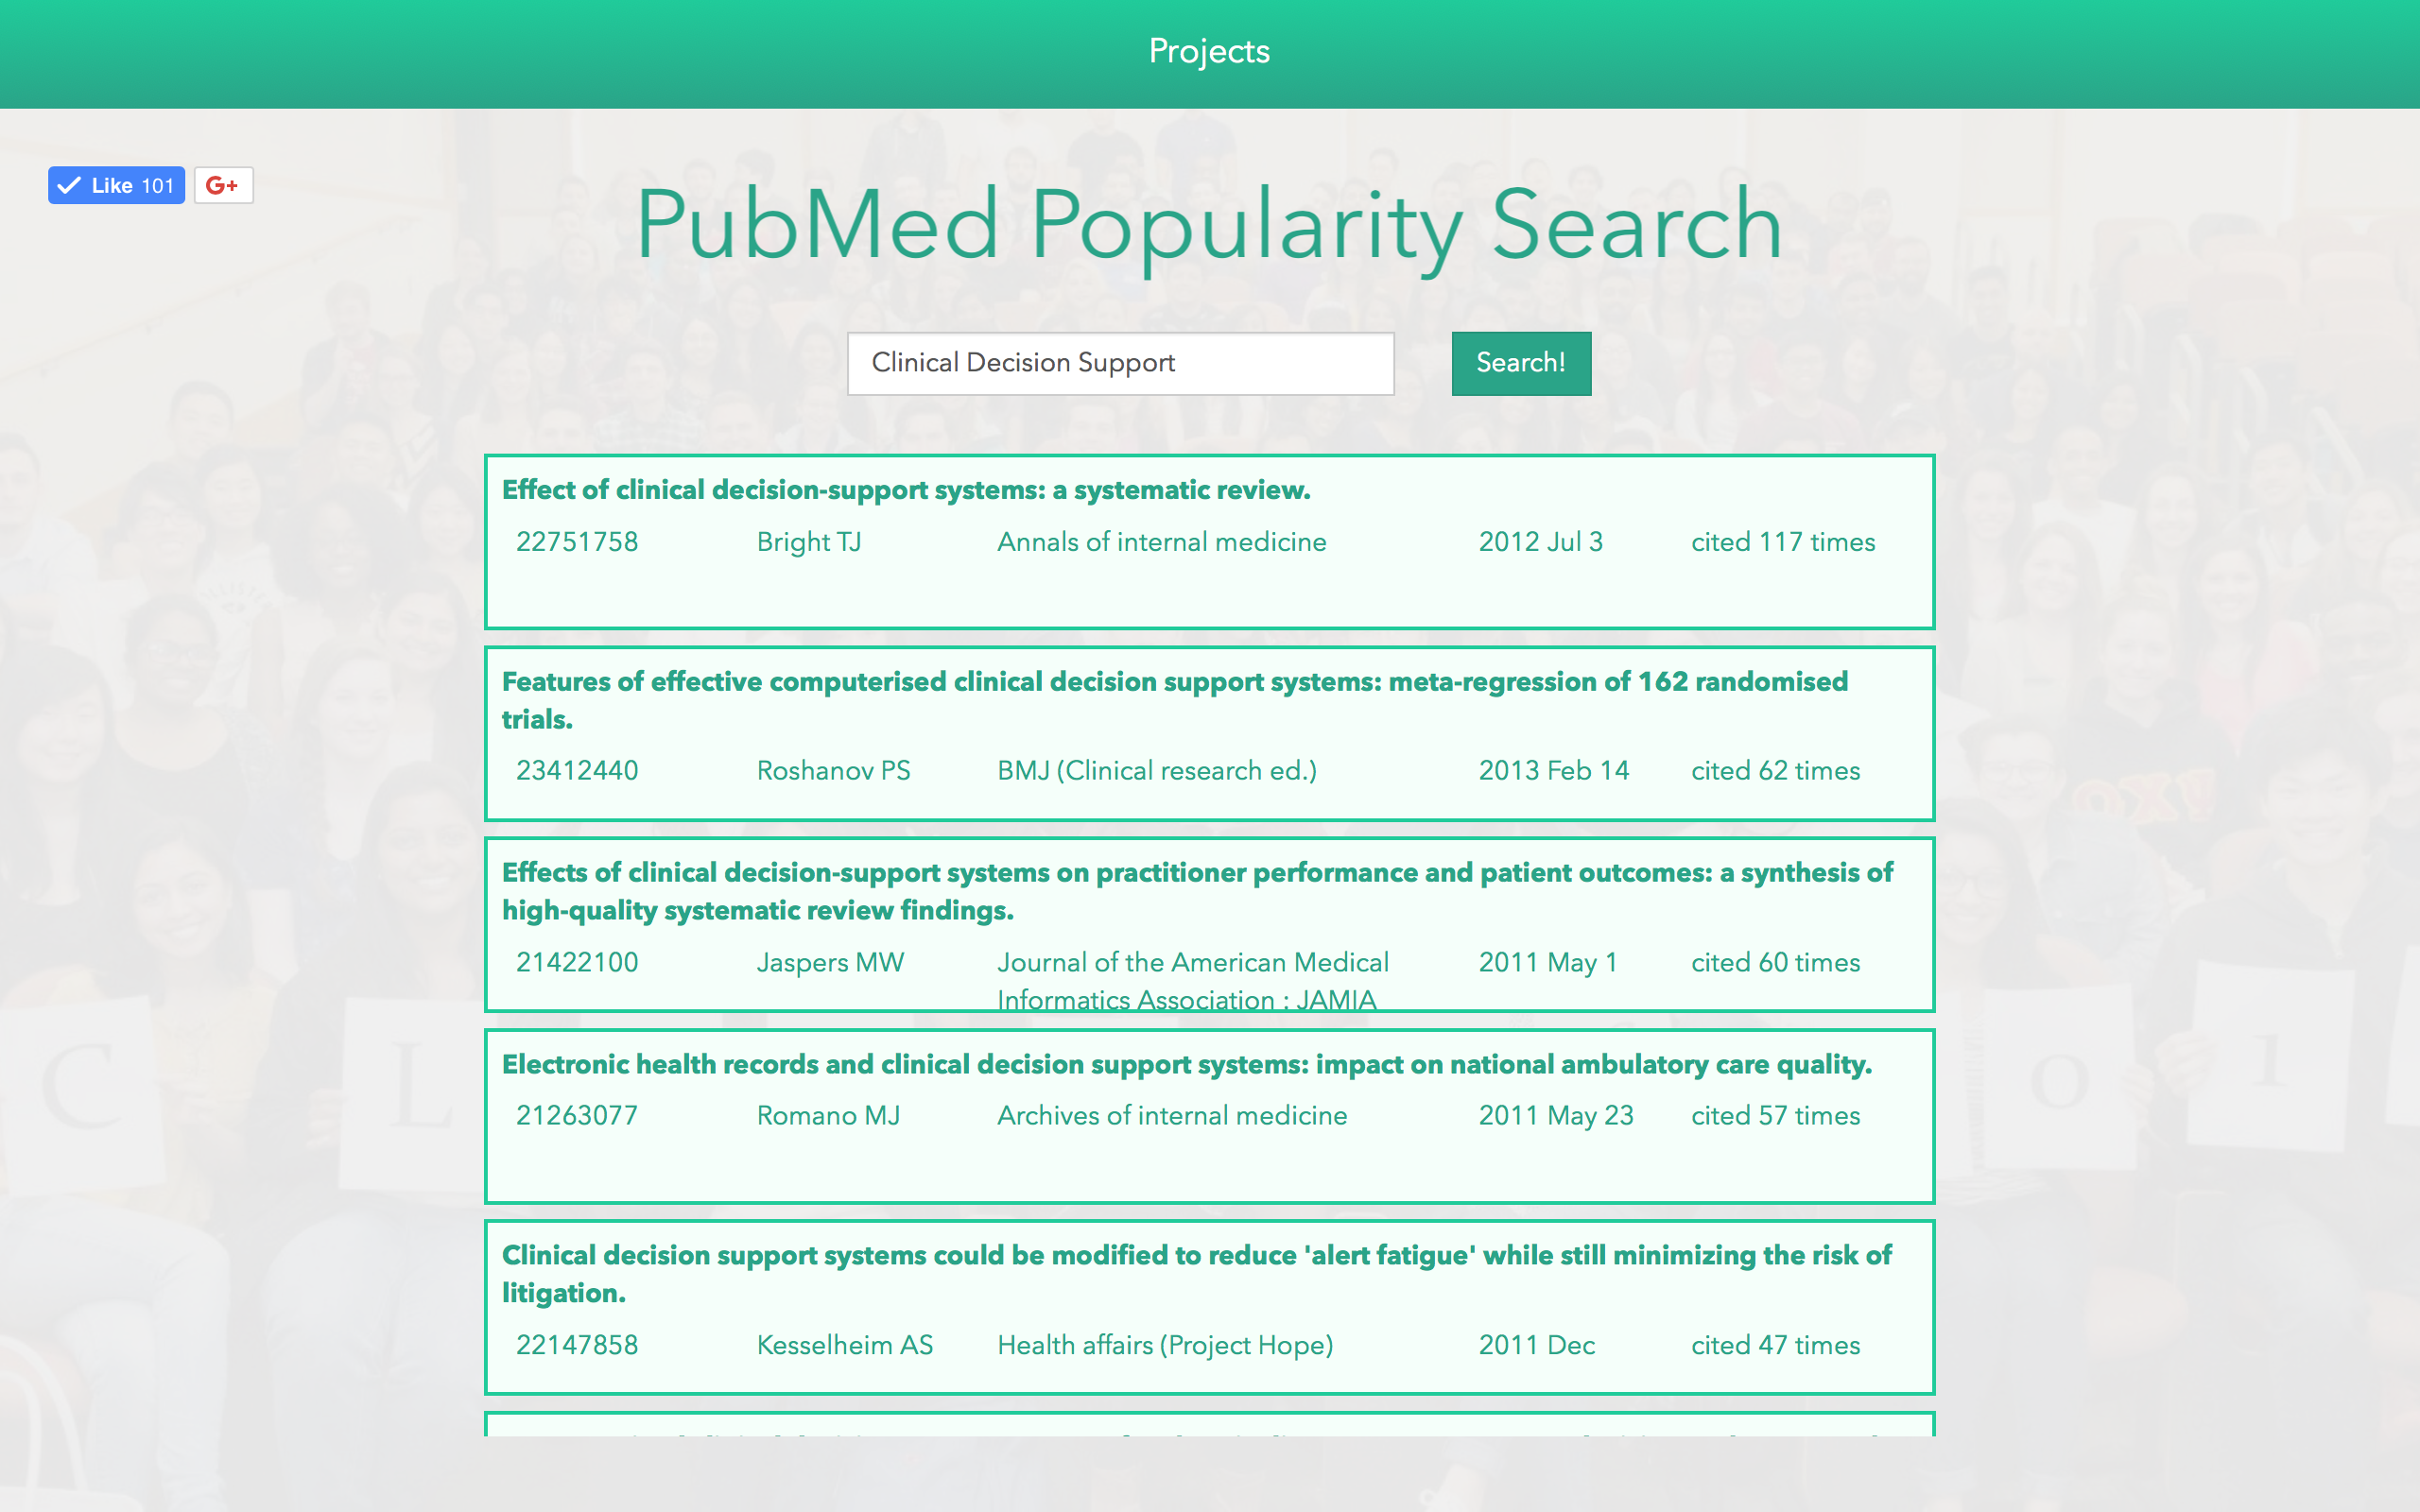 PubMed Popularity Search